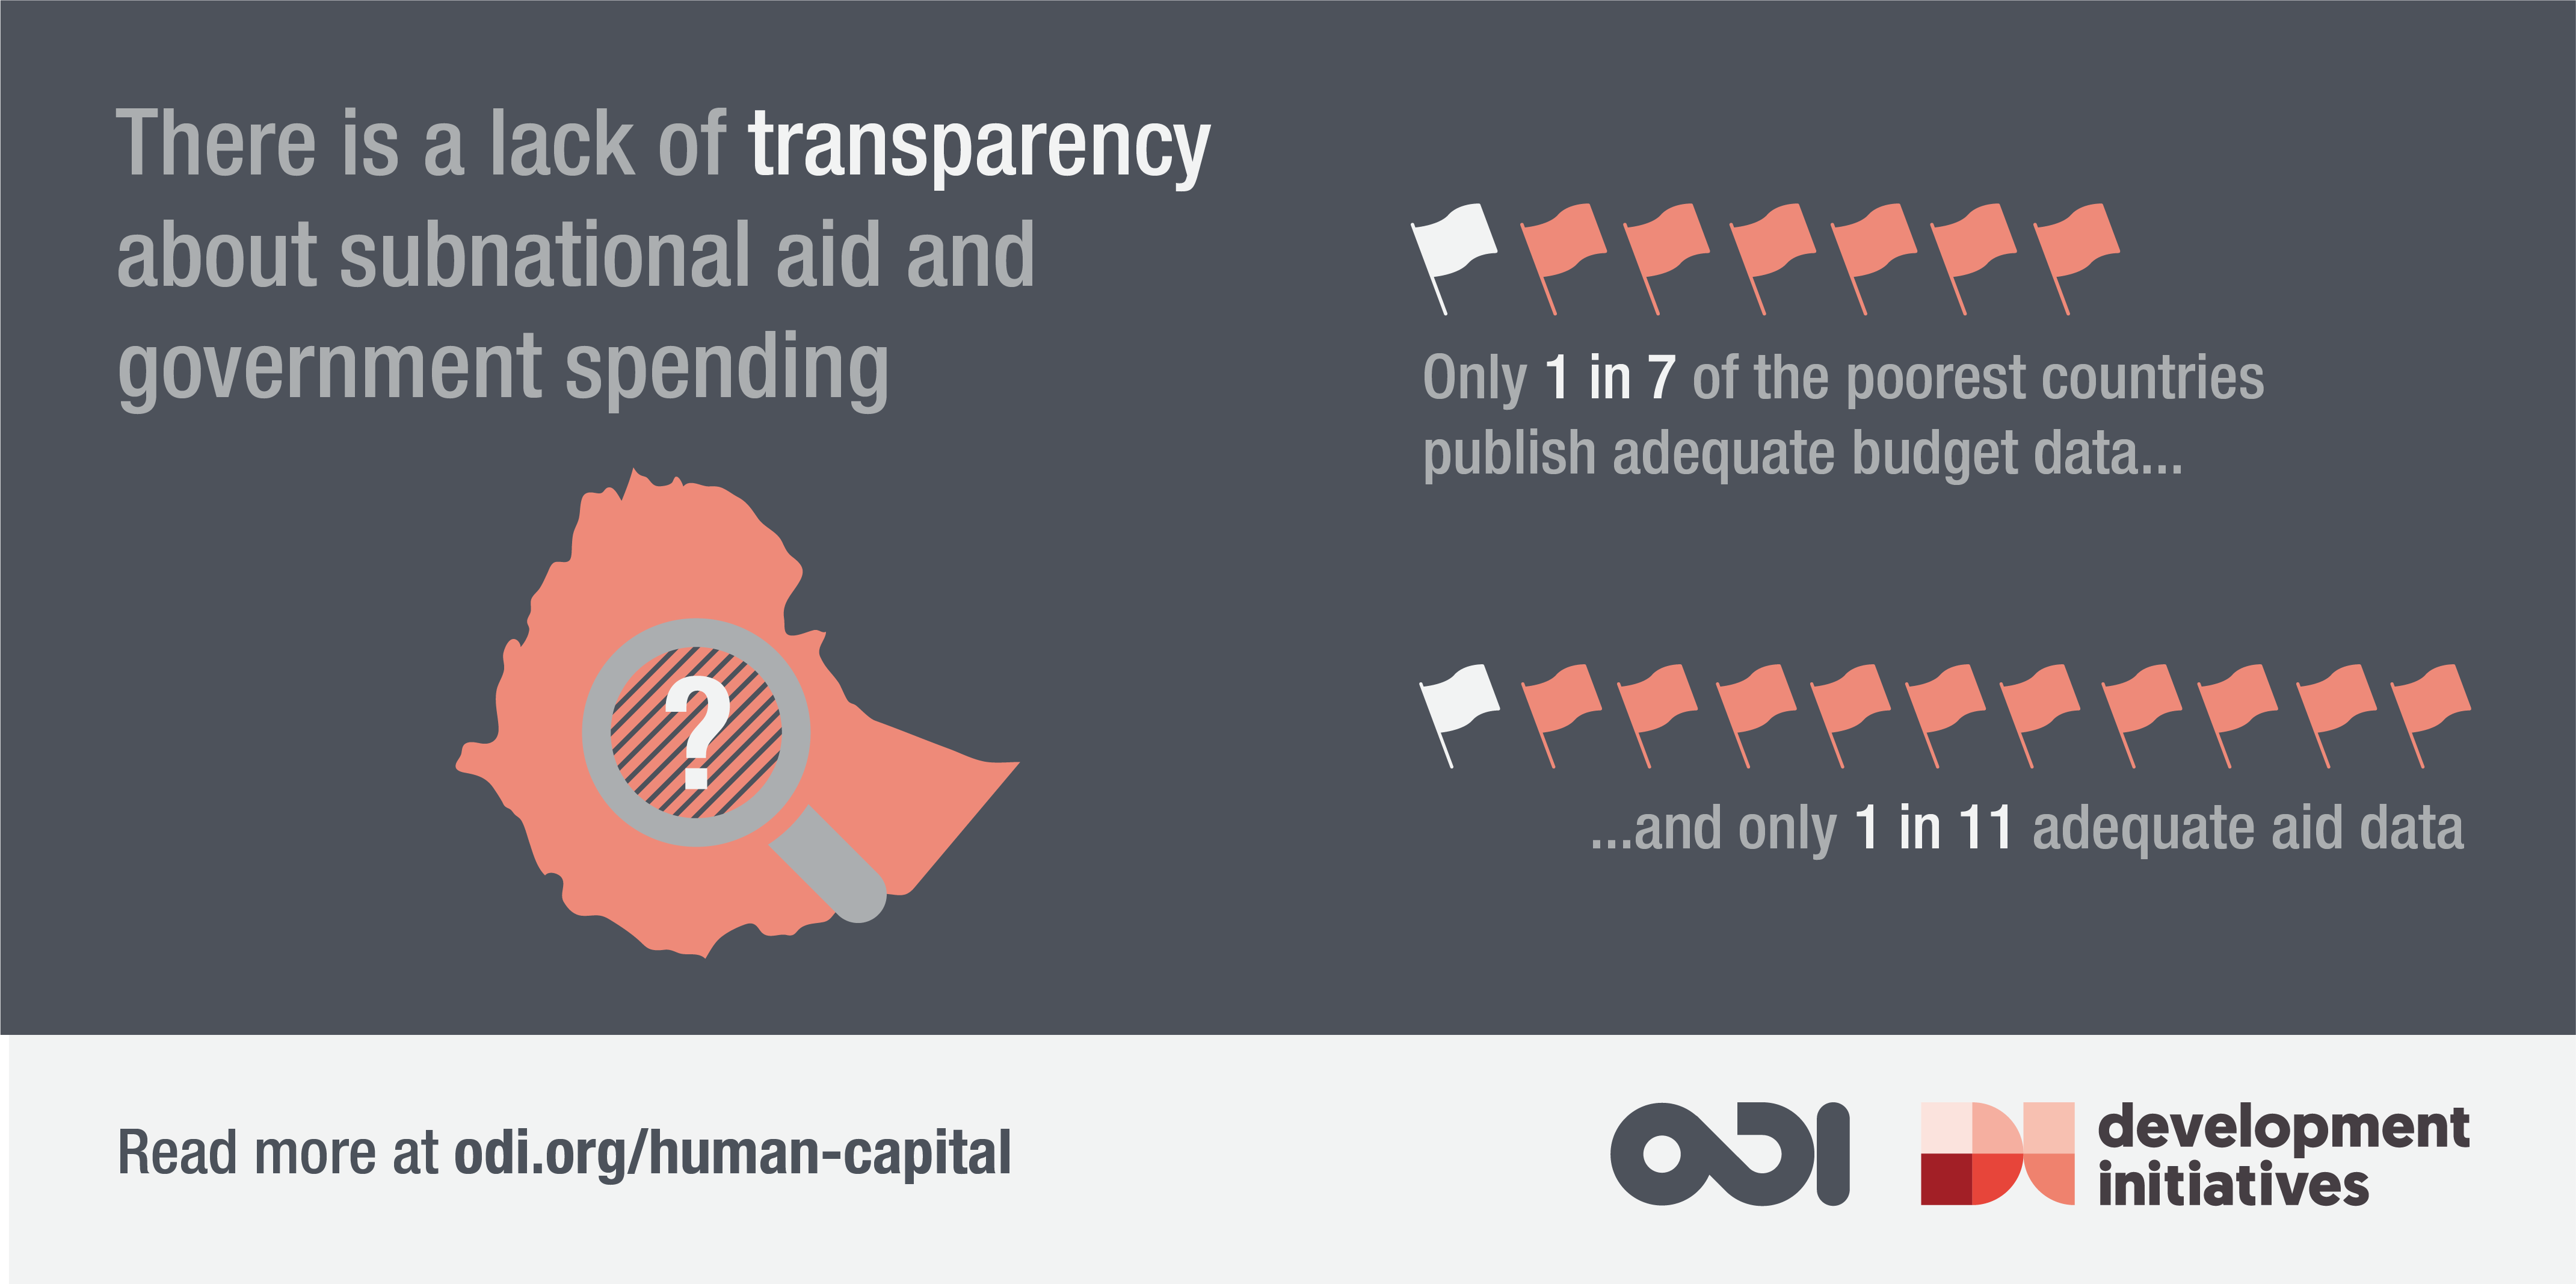 There is a lack of transparency about subnational aid and government spending